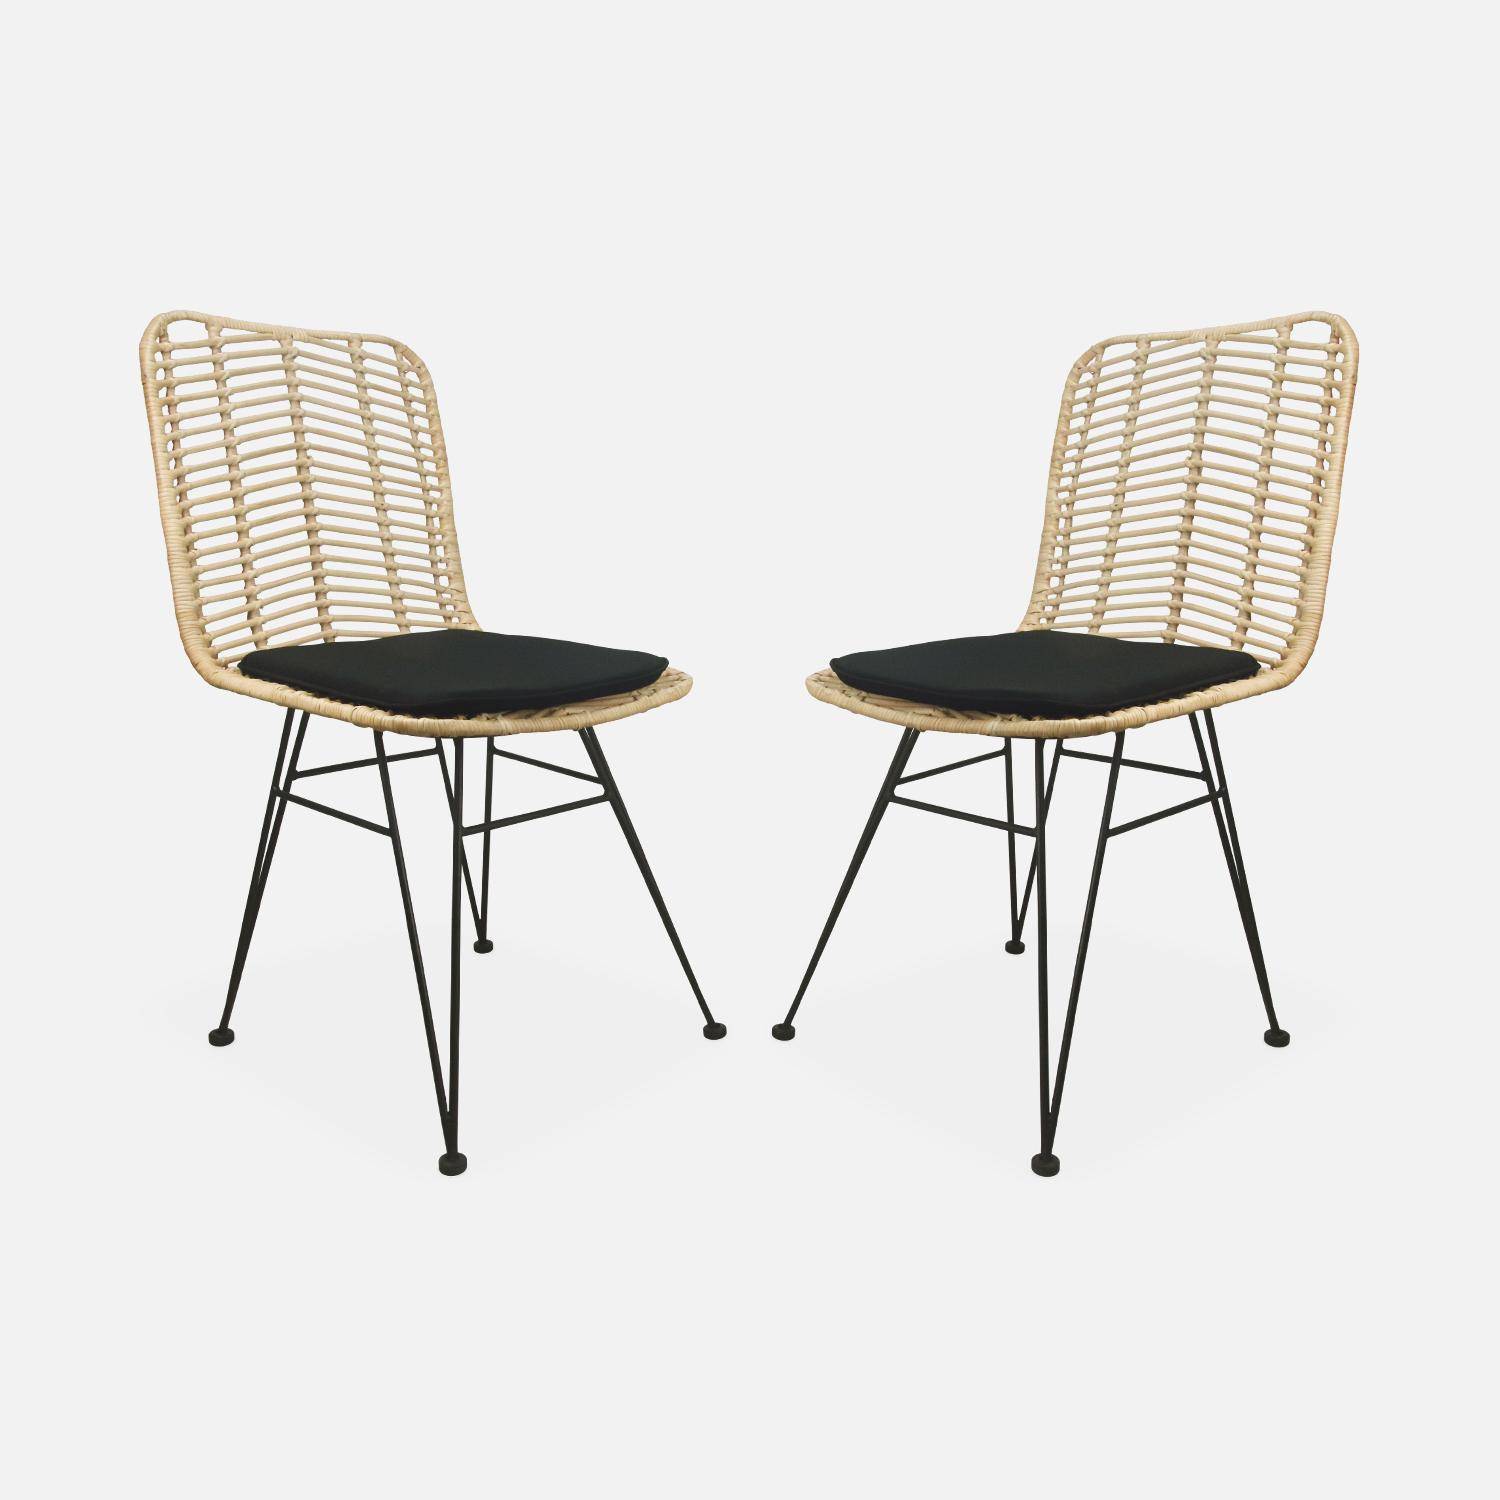 Pair of high-backed rattan dining chairs with metal legs and cushions - Cahya - Natural rattan, Black cushions Photo4